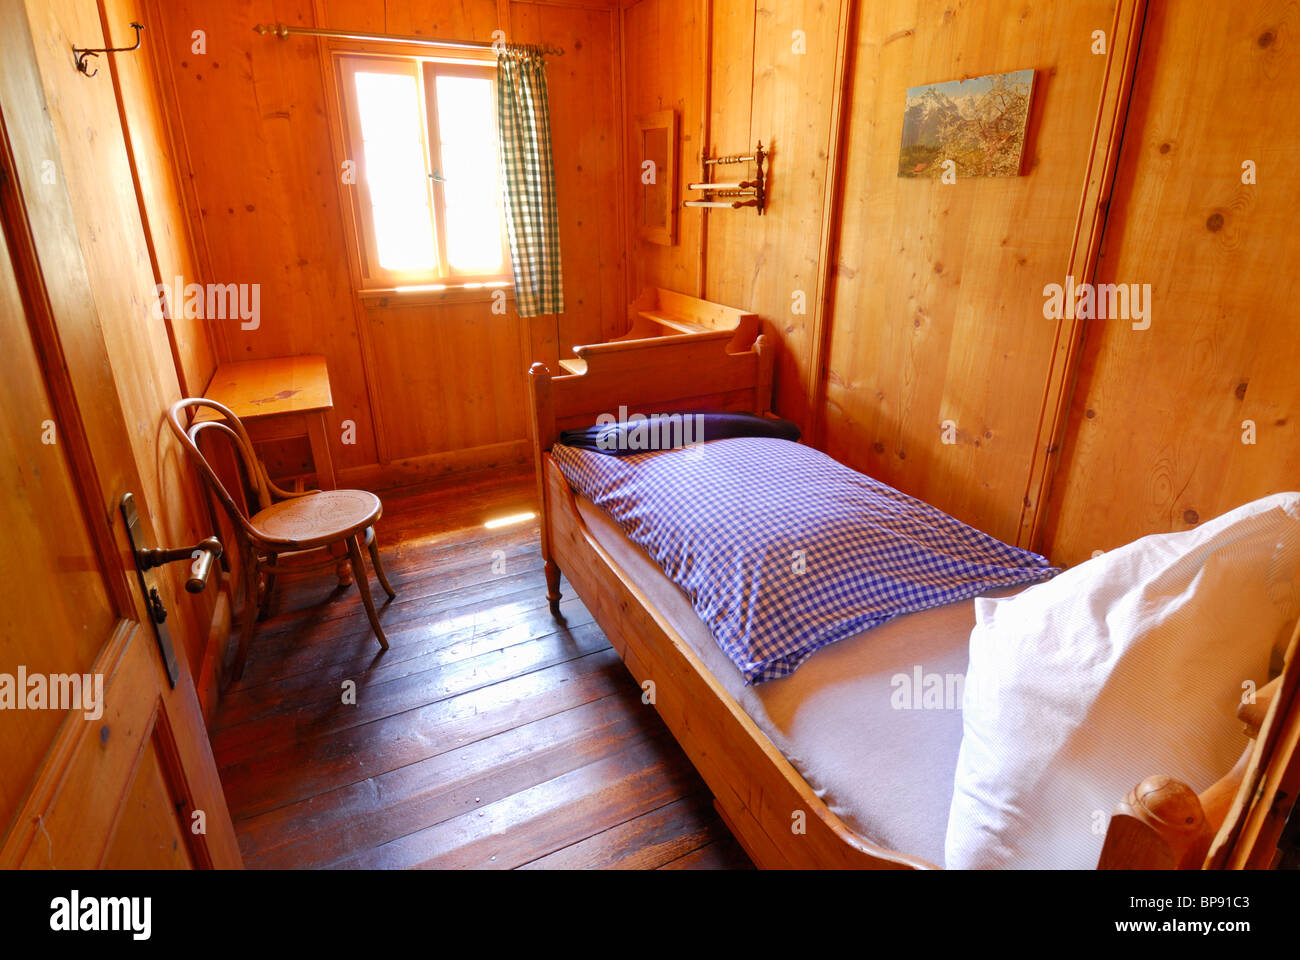 Berliner Hut High Resolution Stock Photography and Images - Alamy